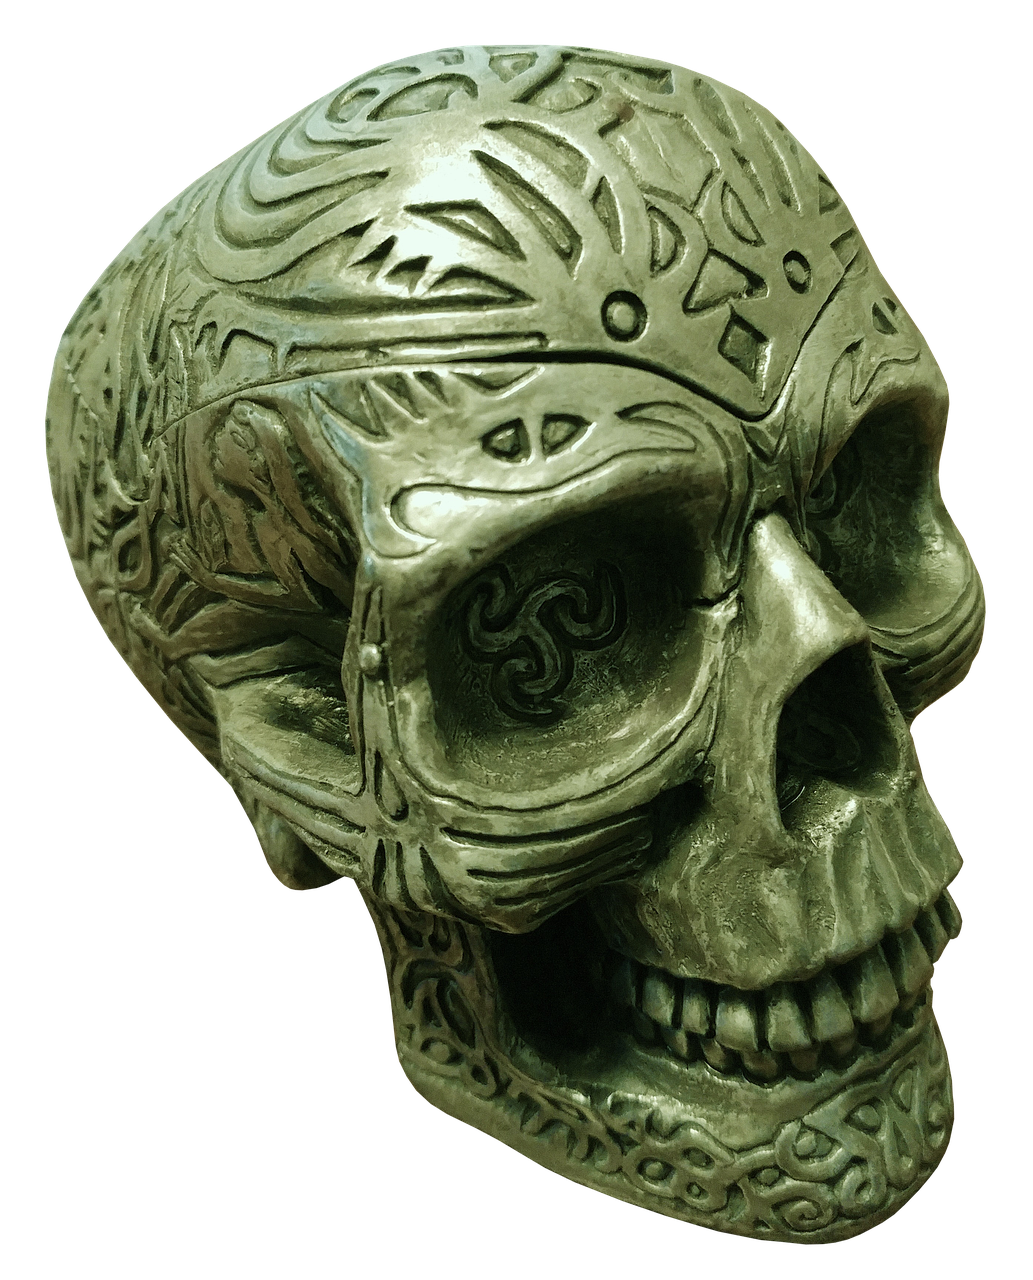 a close up of a statue of a skull, inspired by János Saxon-Szász, zbrush central contest winner, new sculpture, intricate engraving, celtic norse frankish, singularity sculpted �ー etsy, there is a skull over a table